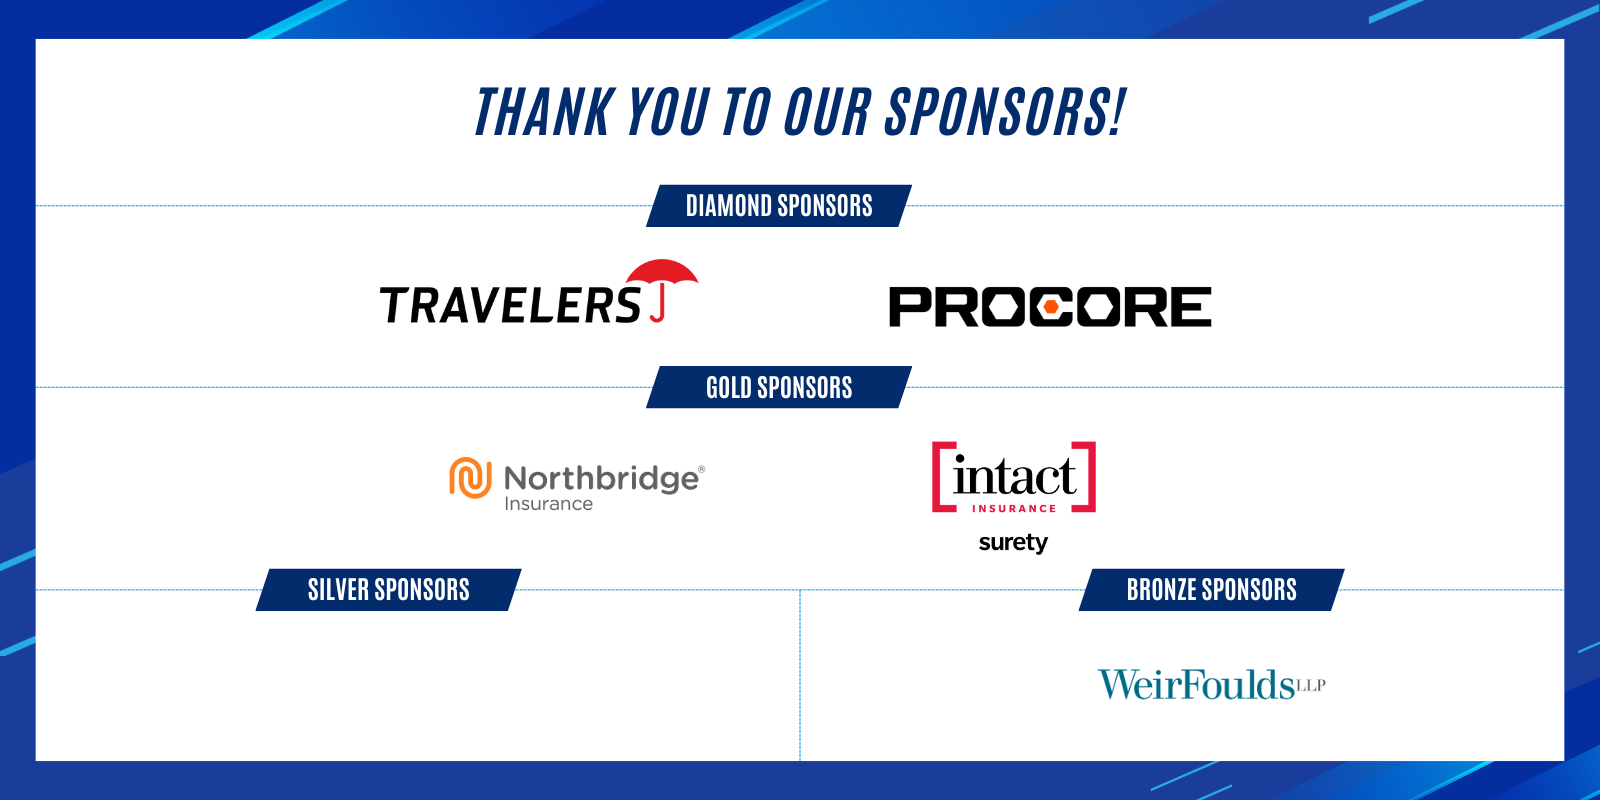 THANK YOU TO OUR SPONSORS!